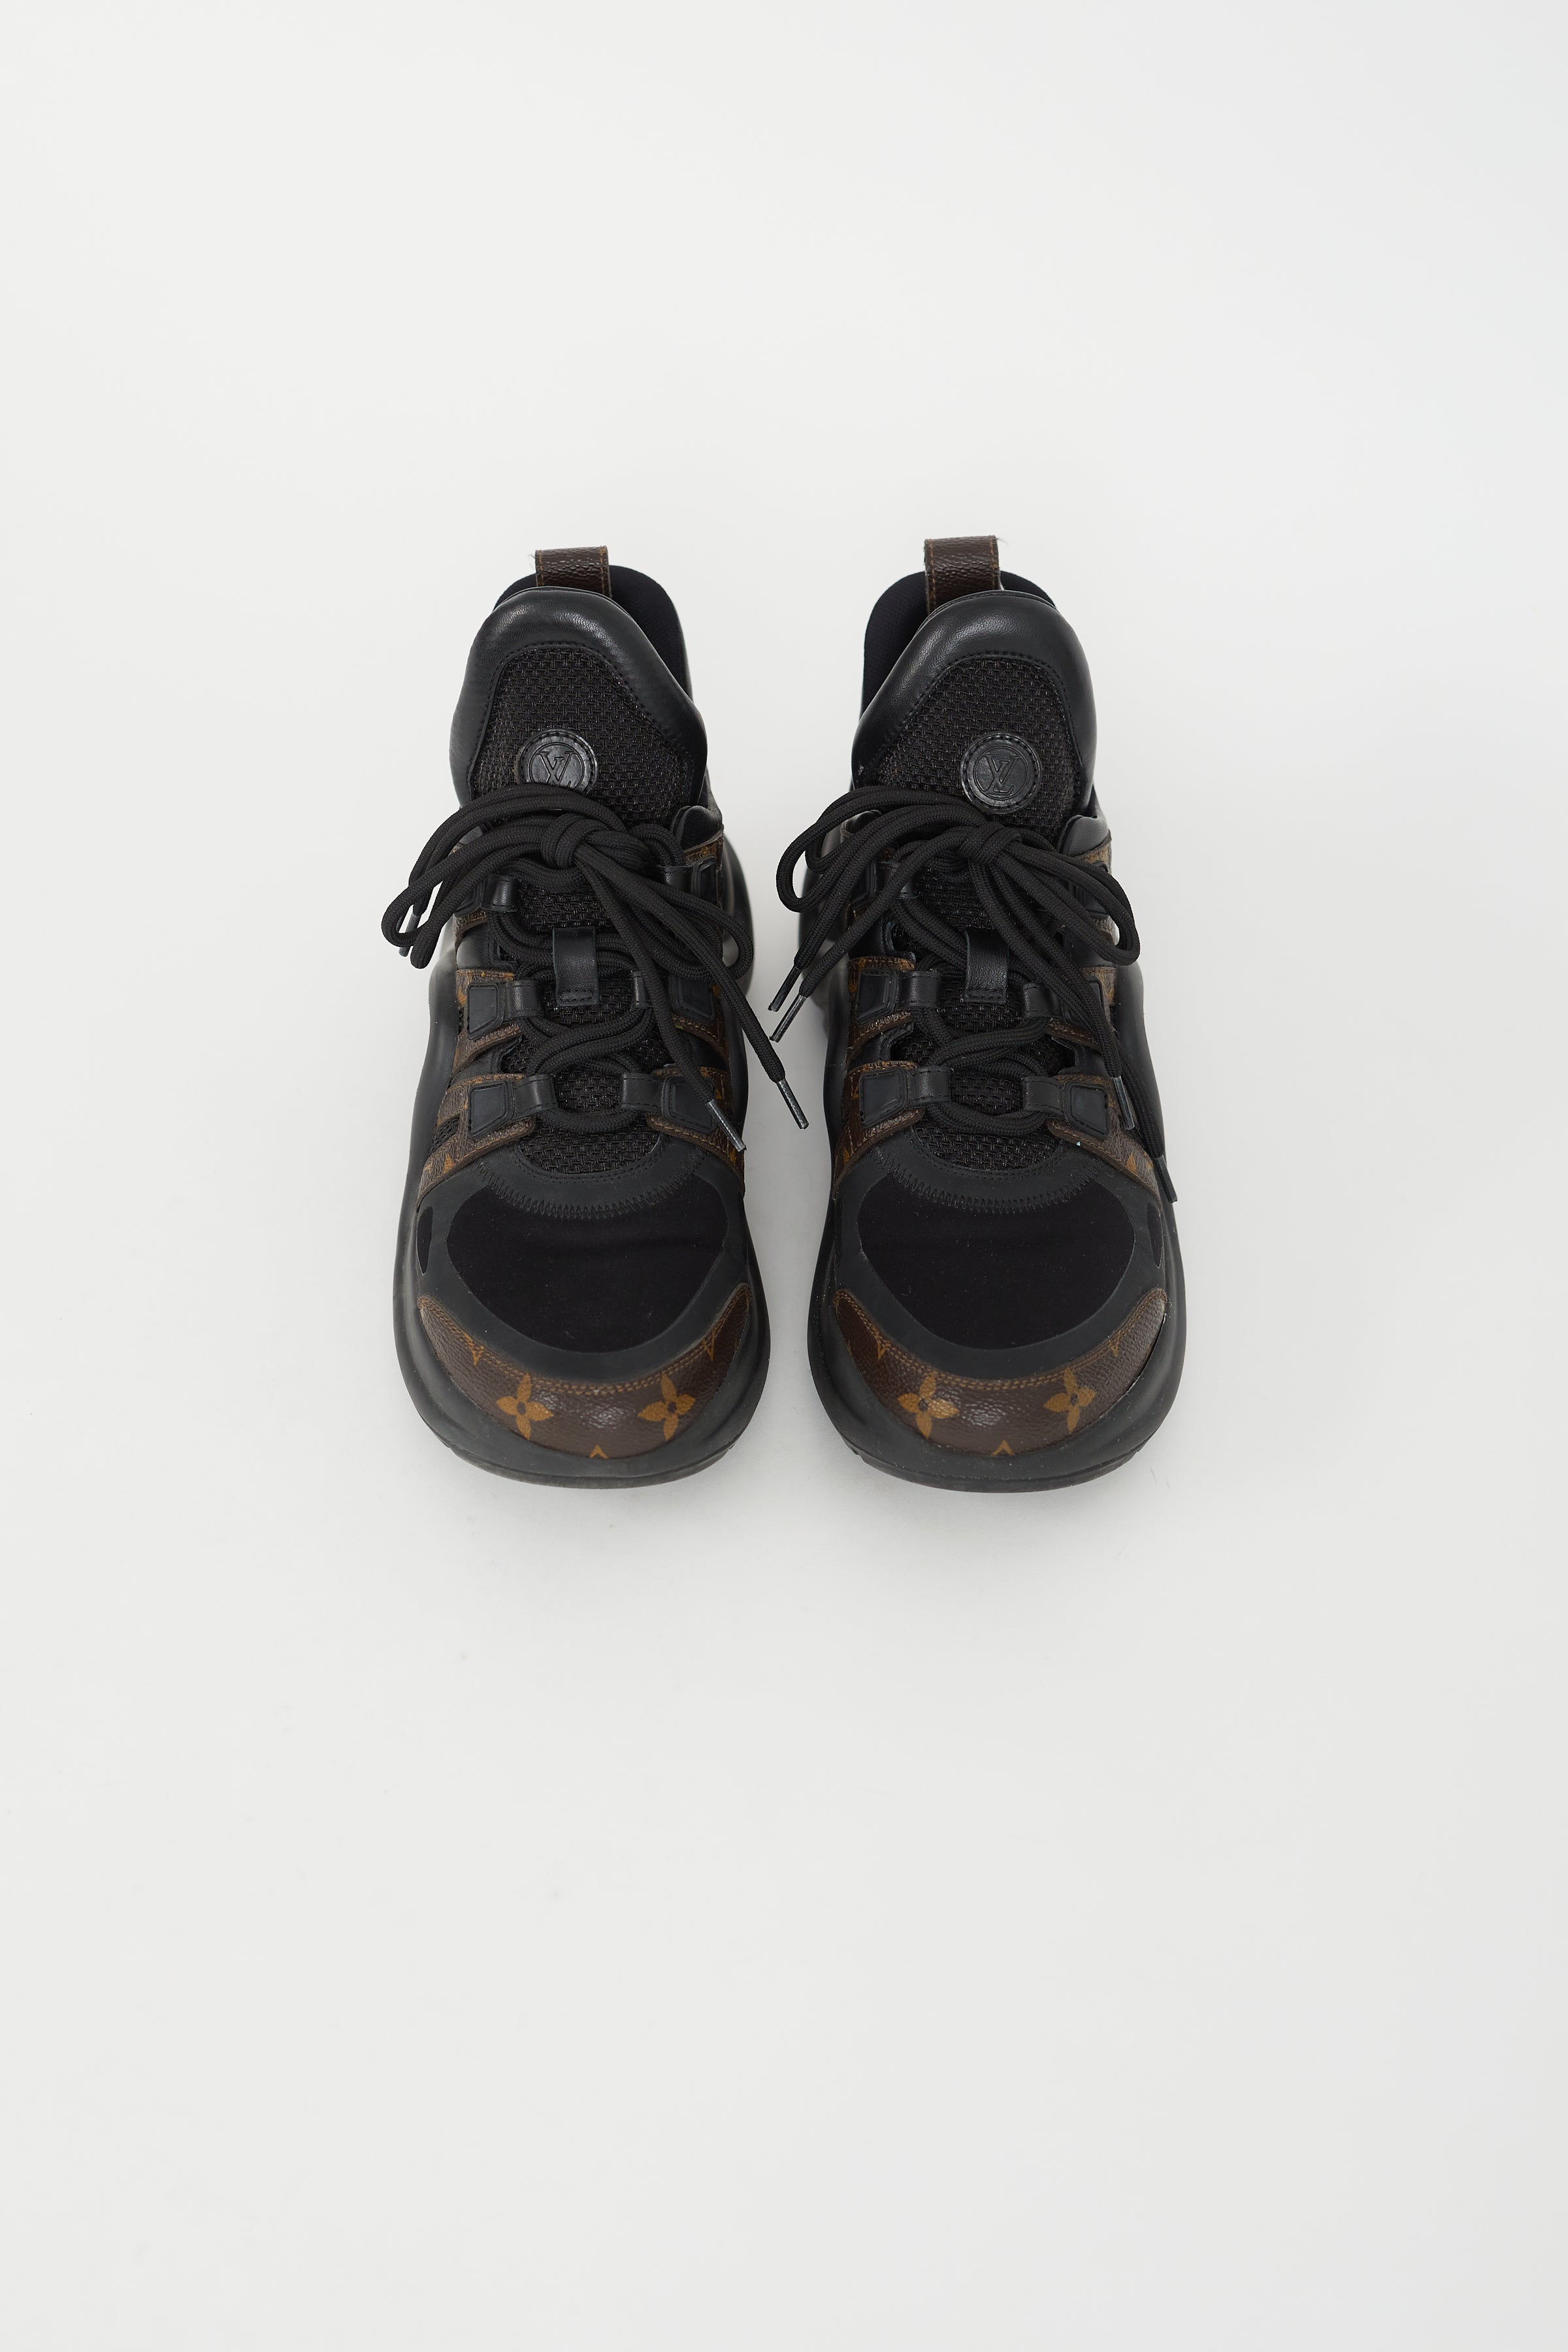 Louis Vuitton Brown/Black Nylon and Leather Archlight Sneakers